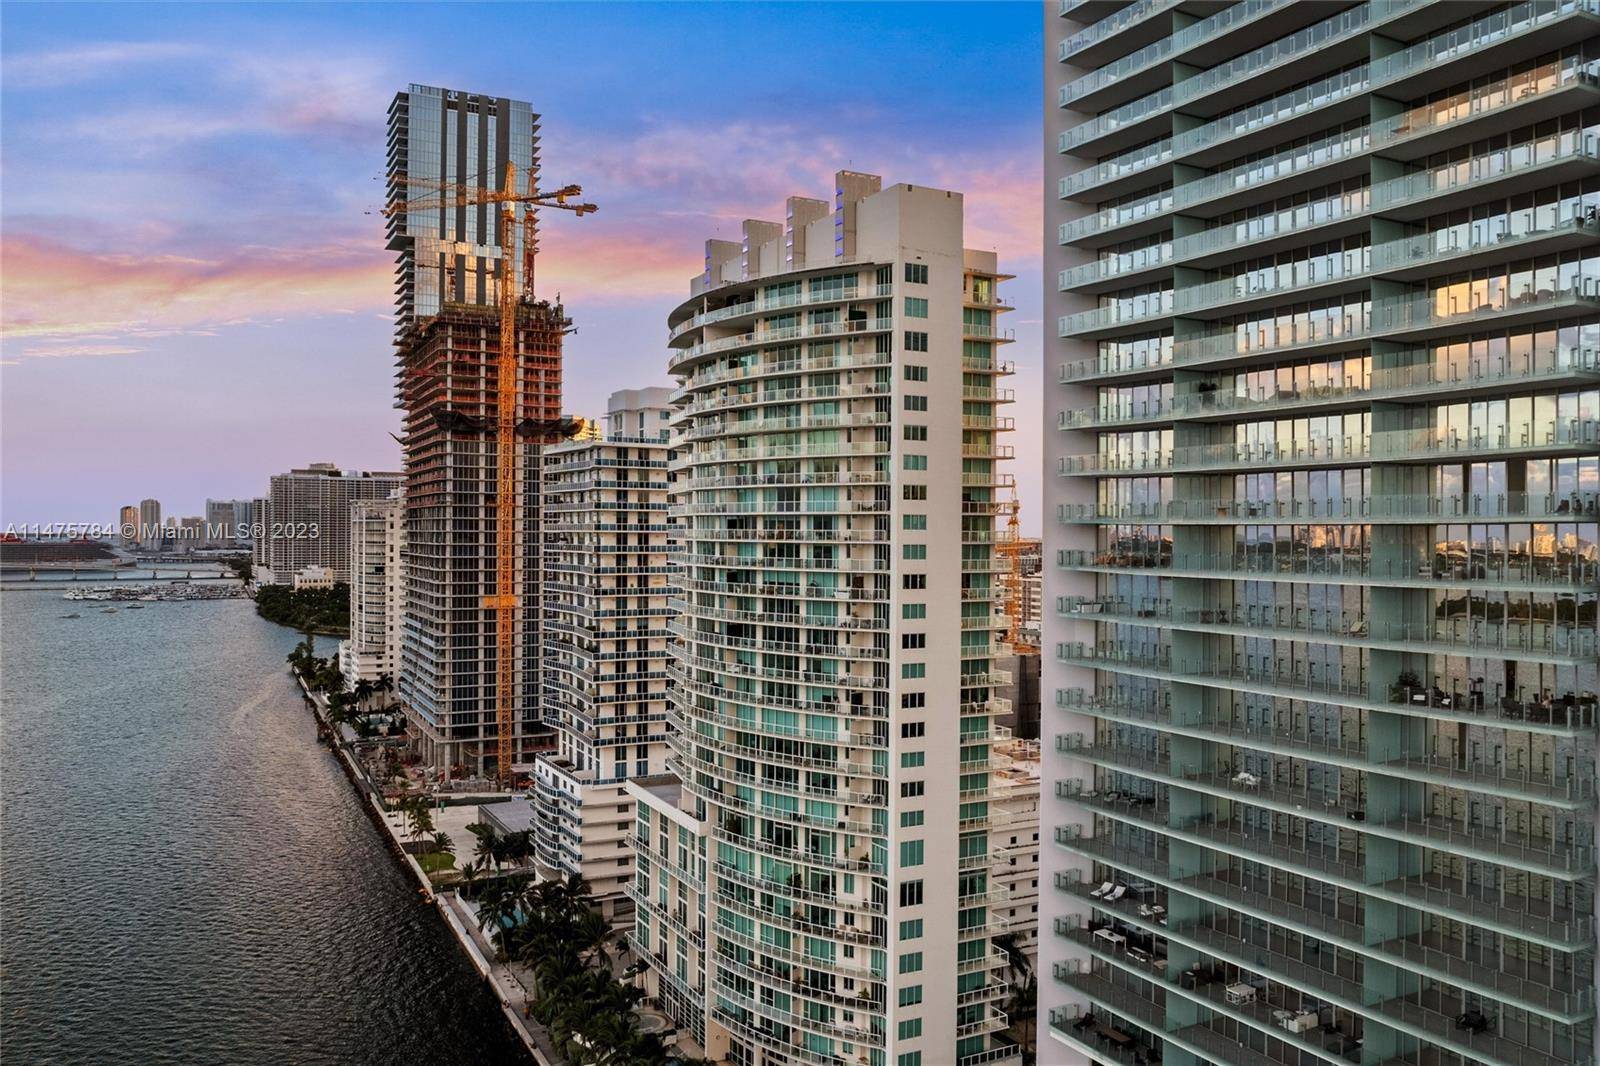 Discover the pinnacle of waterfront living in the vibrant Edgewater neighborhood of Miami at Missoni Baia.